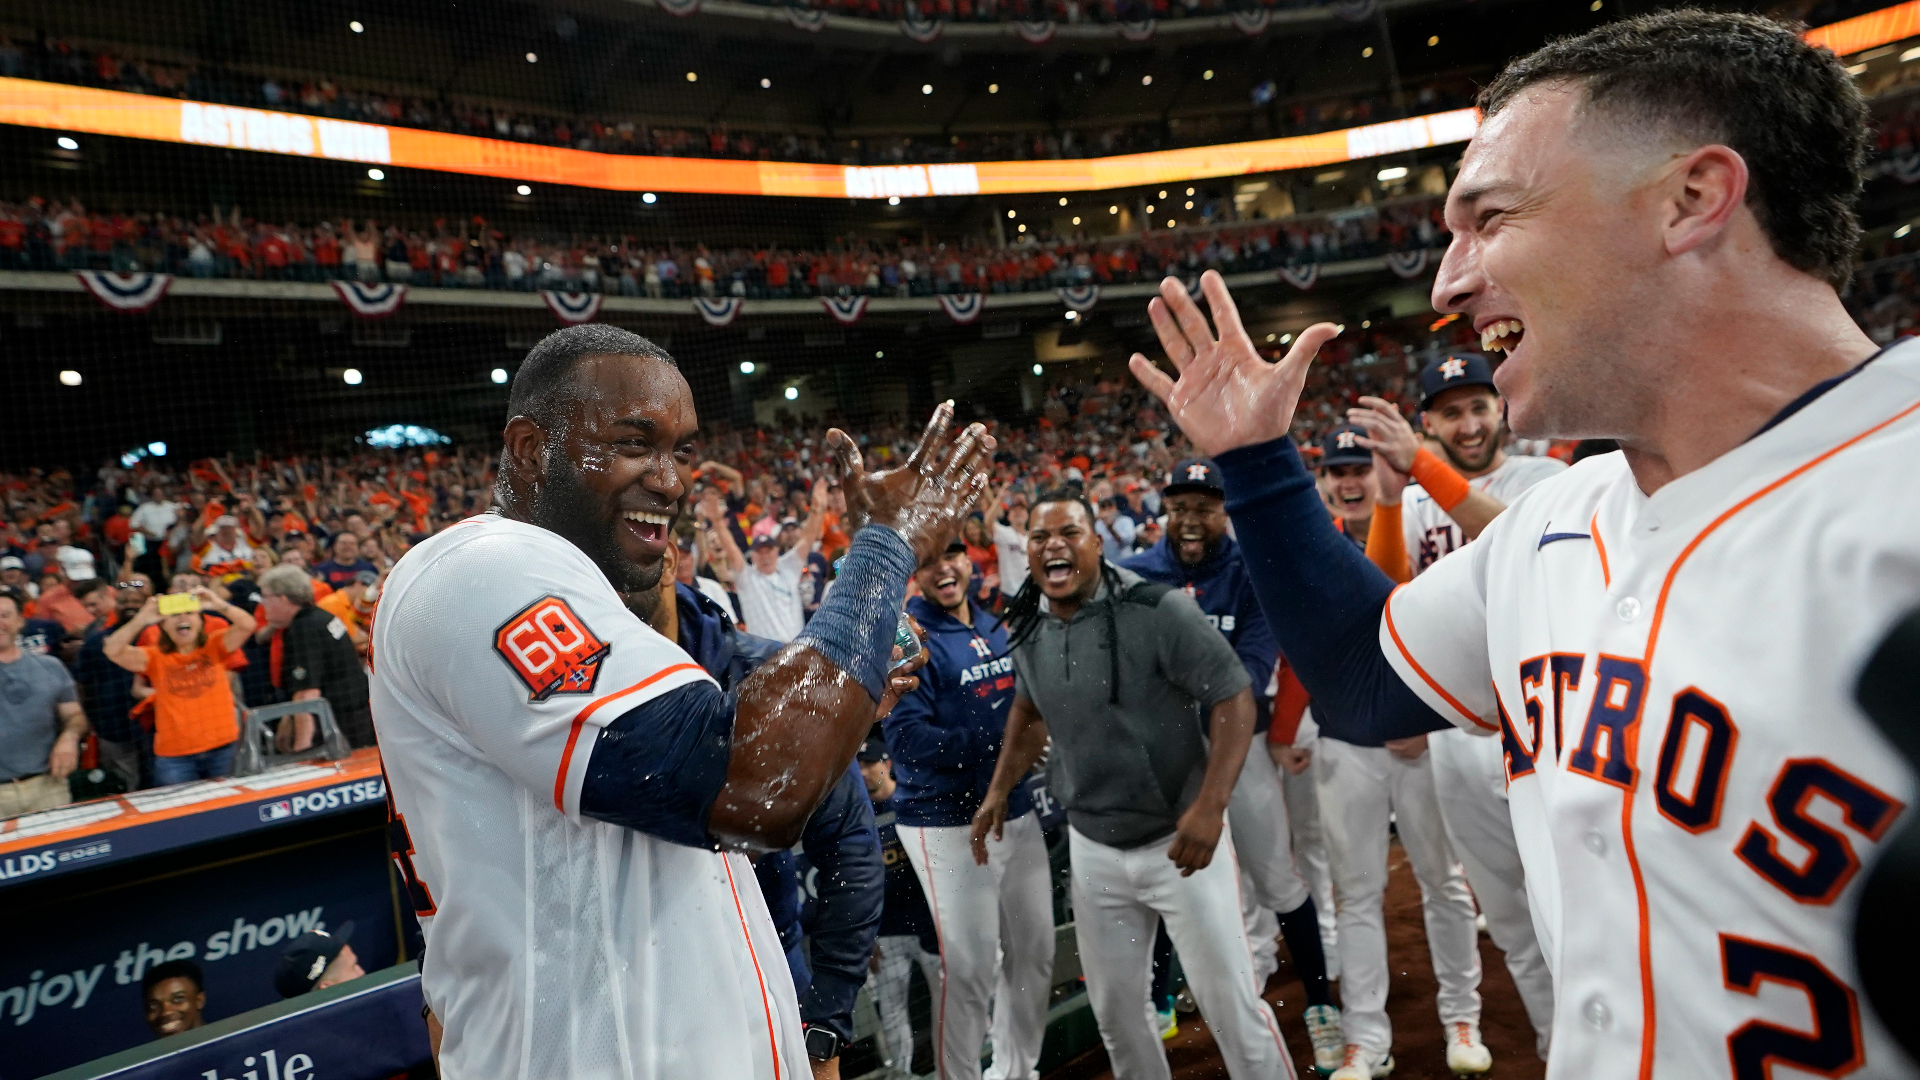 WHO IS YORDADDY?' Social media reacts to Astros win in Game 1 of